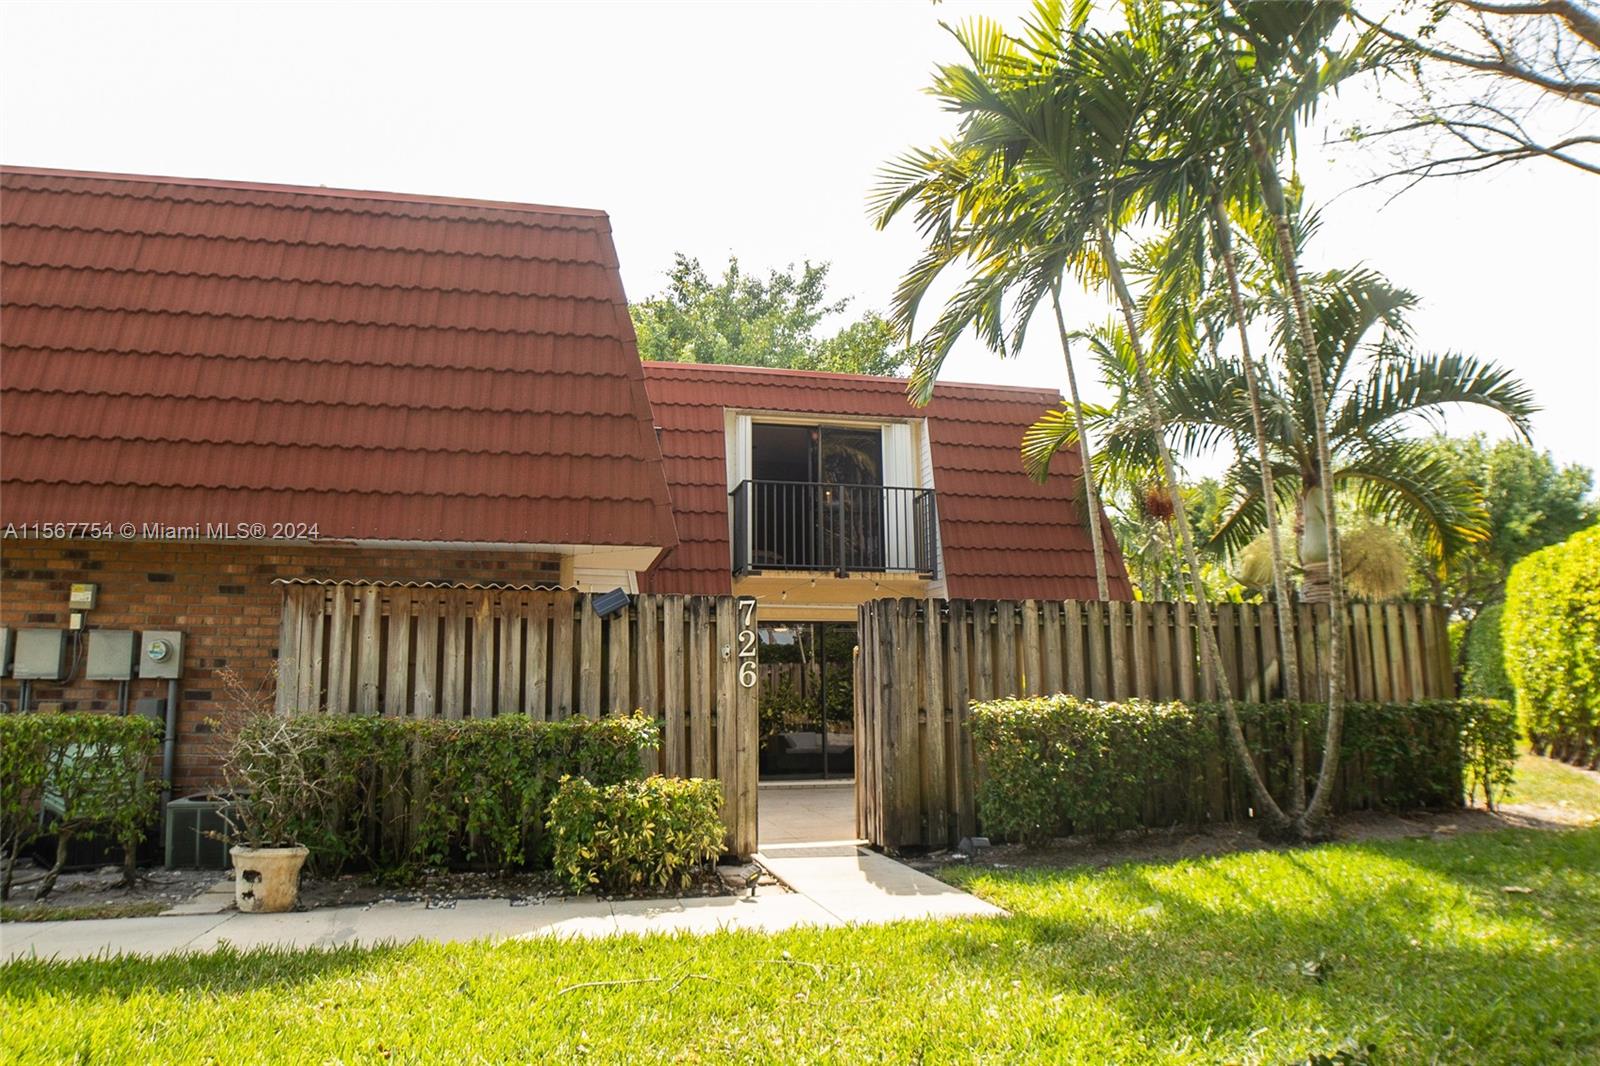 726 NW 98th Cir 726, Plantation, Florida 33324, 2 Bedrooms Bedrooms, ,2 BathroomsBathrooms,Residentiallease,For Rent,726 NW 98th Cir 726,A11567754